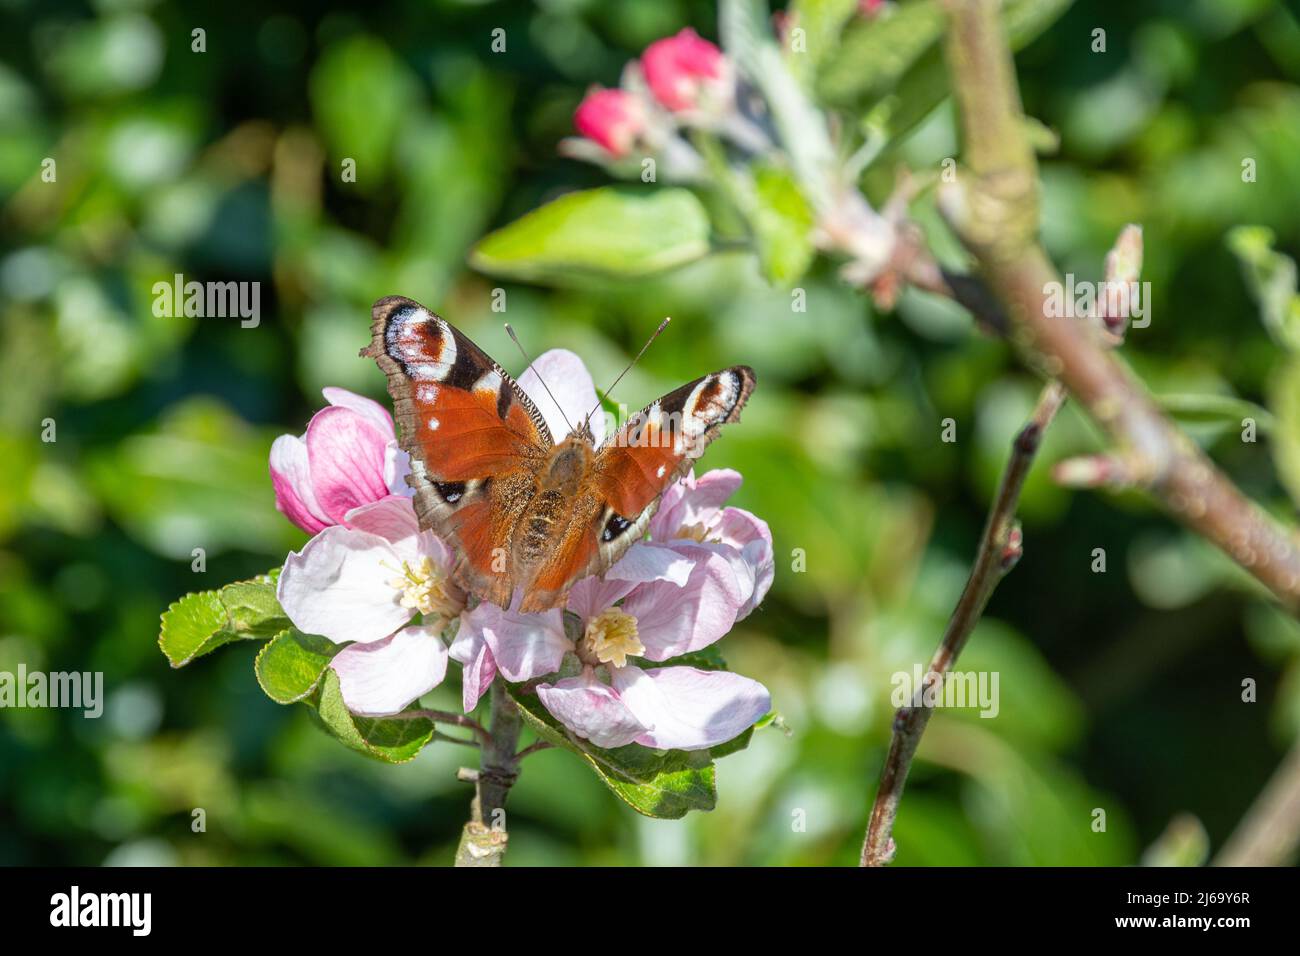 Peacock butterfly (Aglais io) nectaring on apple blossom during April or spring, England, UK Stock Photo